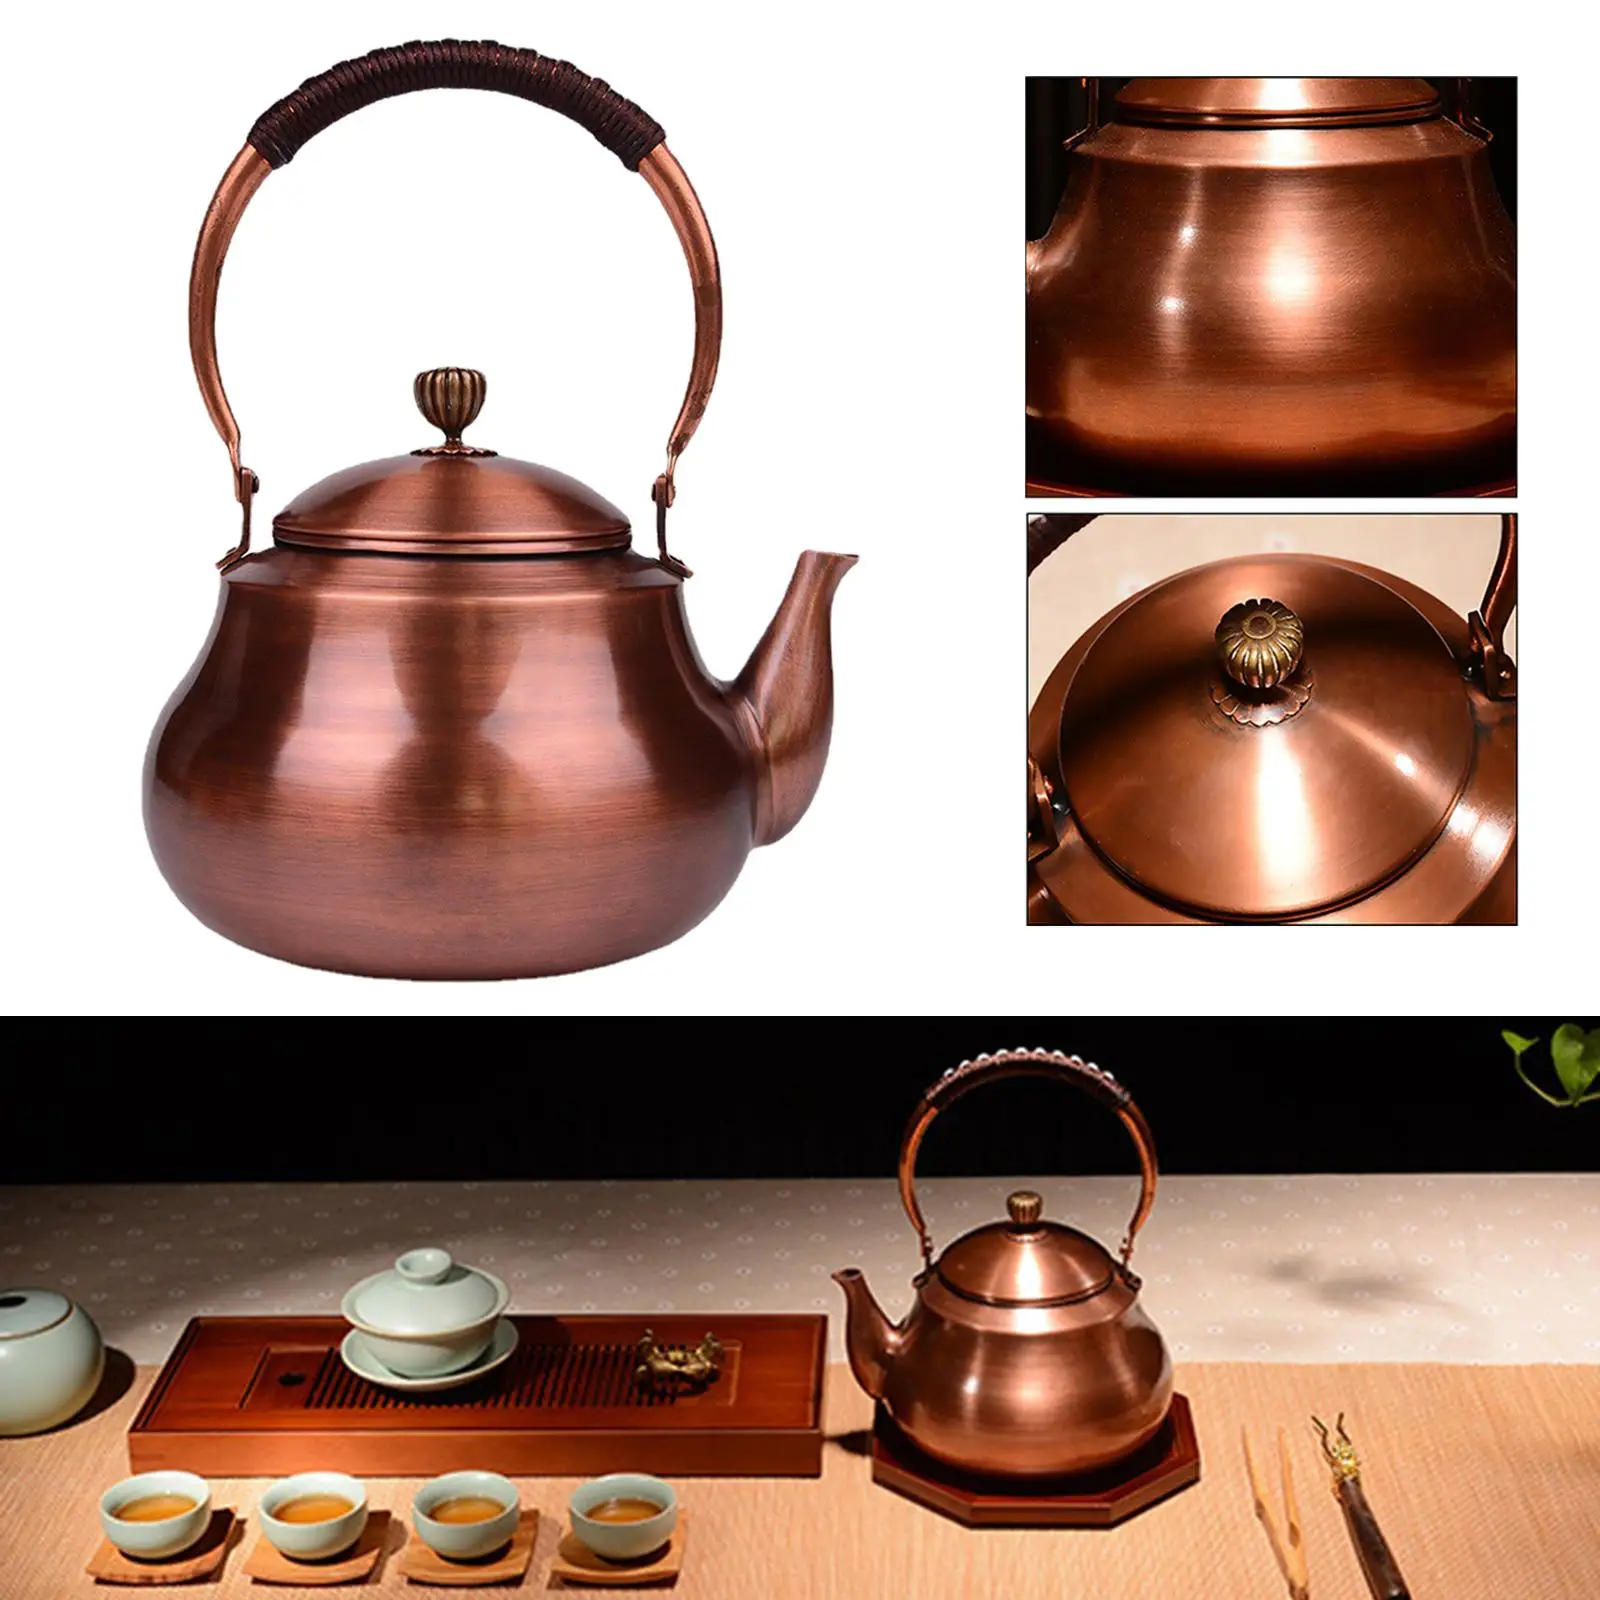 Stove Top Water Kettle Anti Scalding Handle Hot Water Kettle 1.5L Coffee Pot Teapot Tea Kettle for Electric/Induction/Gas Stove